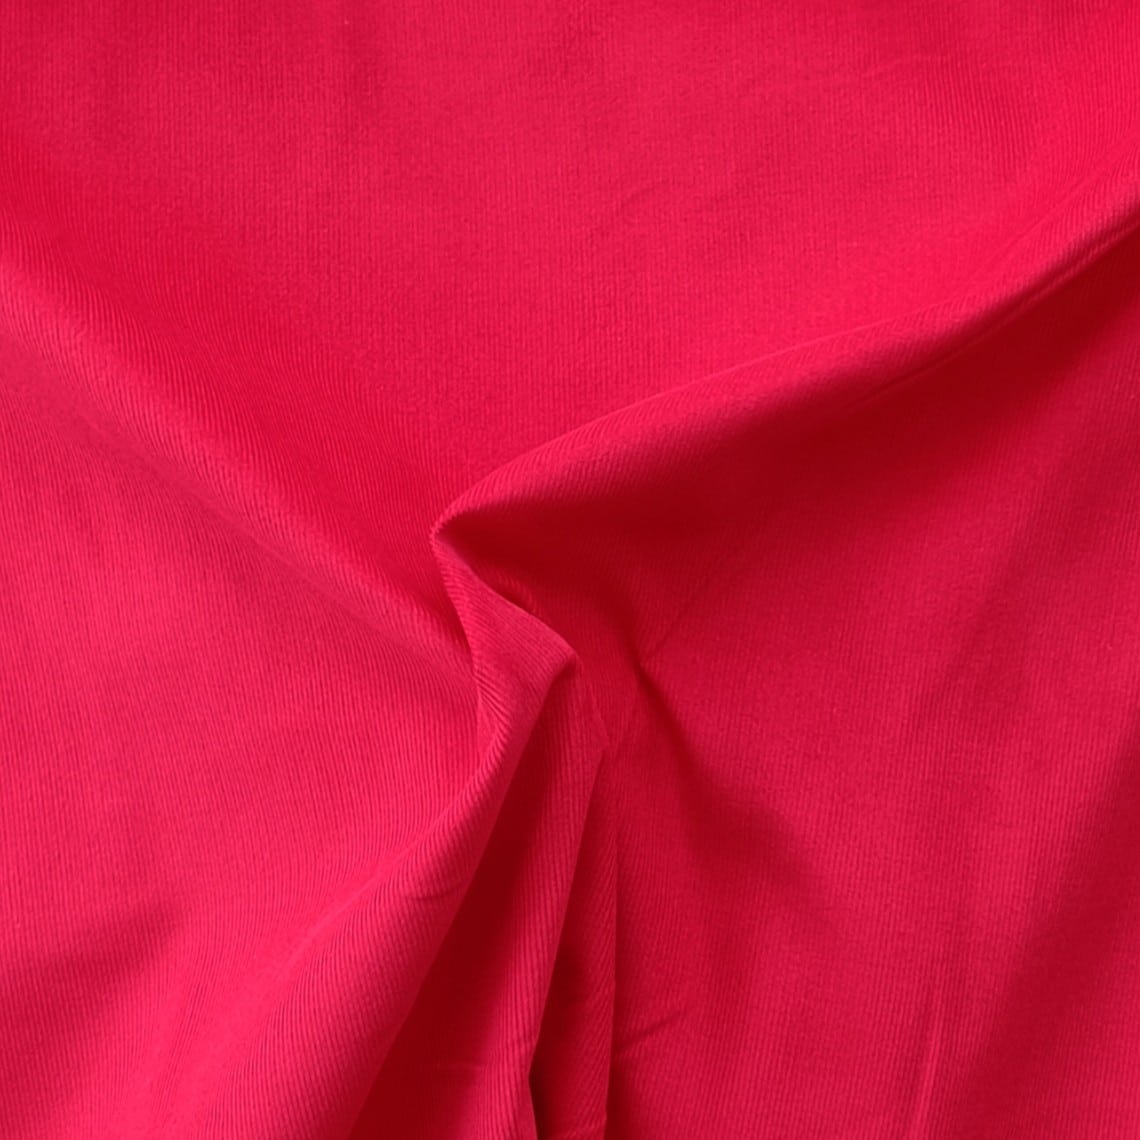 Babycord red corduroy fabric | More Sewing